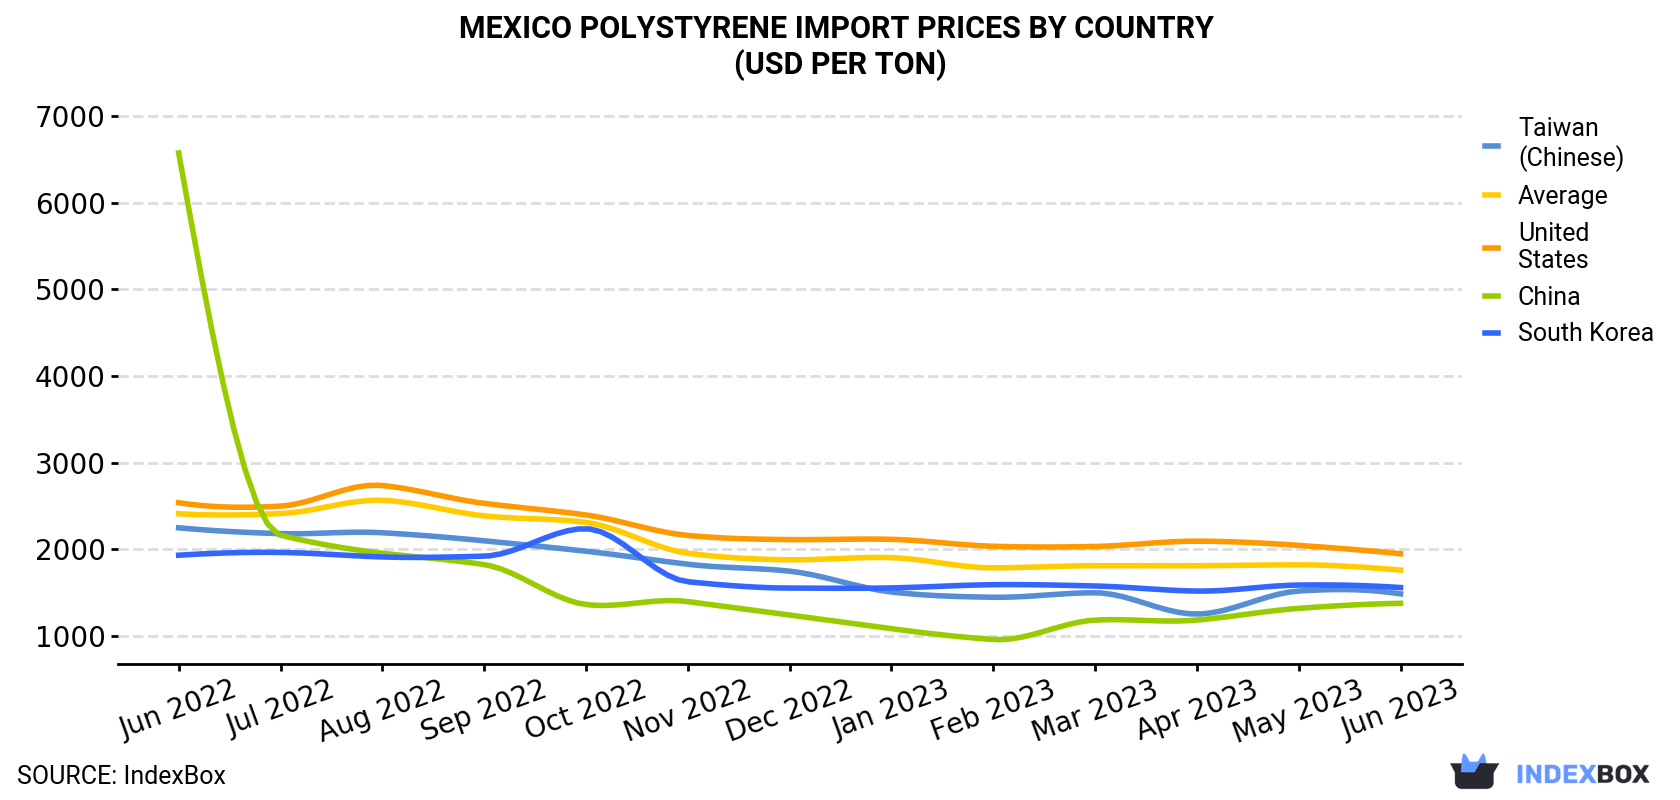 Mexico Polystyrene Import Prices By Country (USD Per Ton)